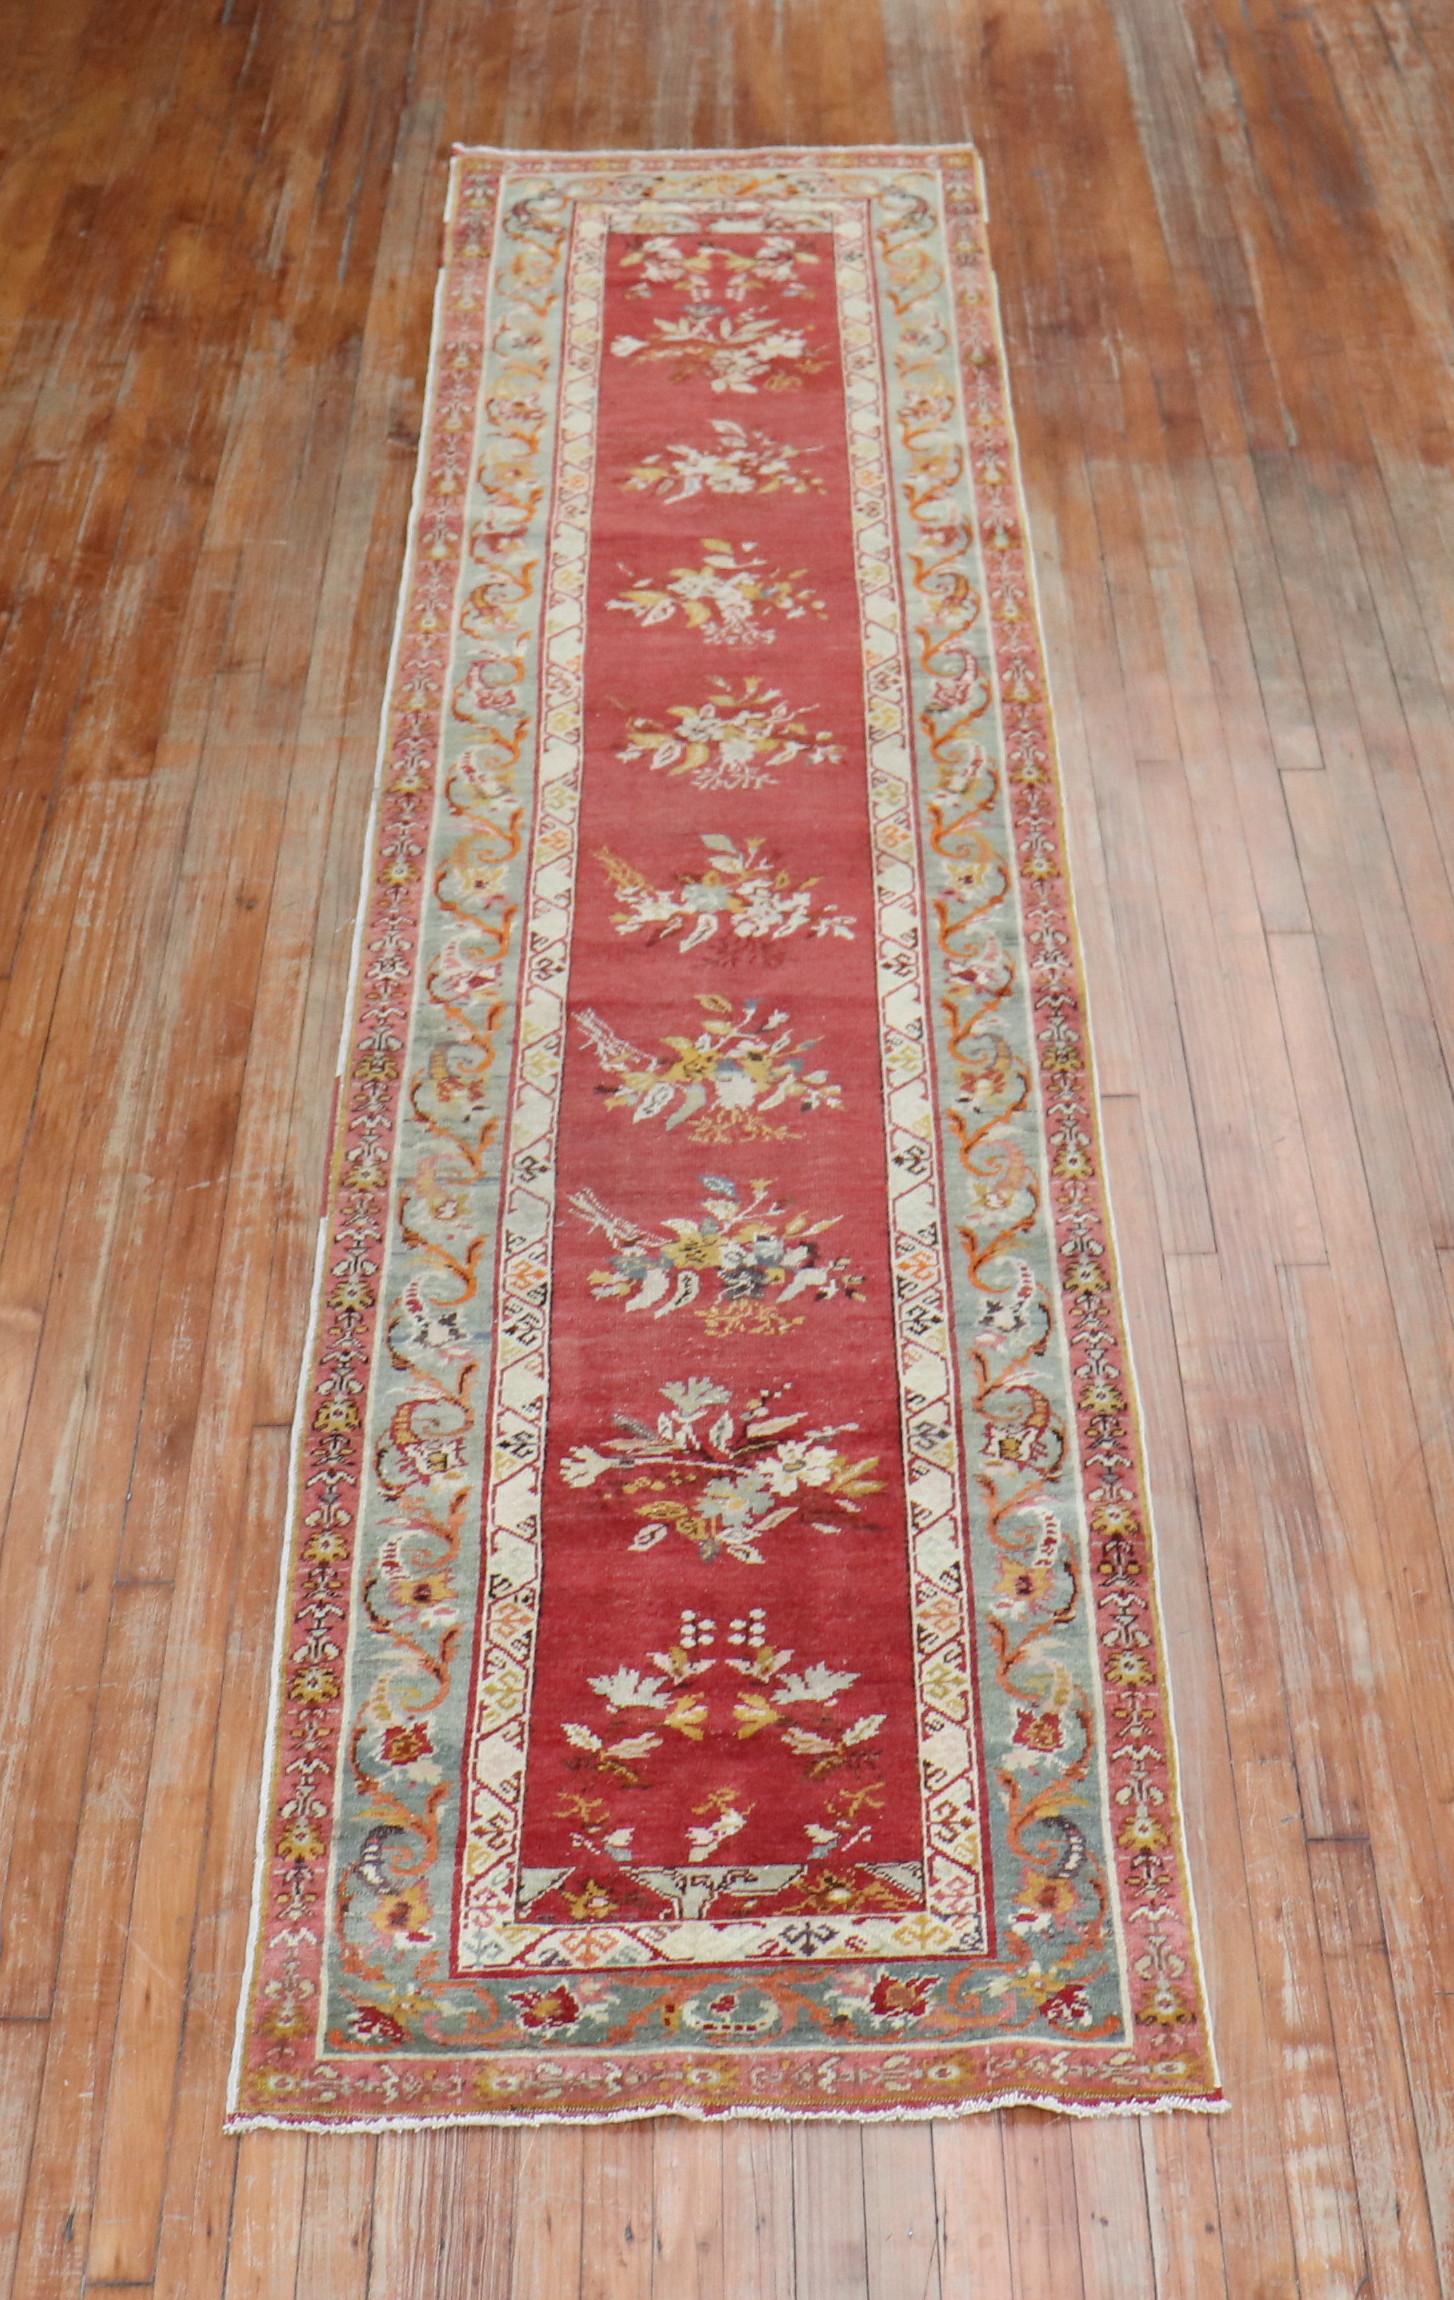 Early 20th century red field Turkish runner with an all-over repetitive flower design on a red field. The border is in green

Measures: 2'9” x 11'6”.